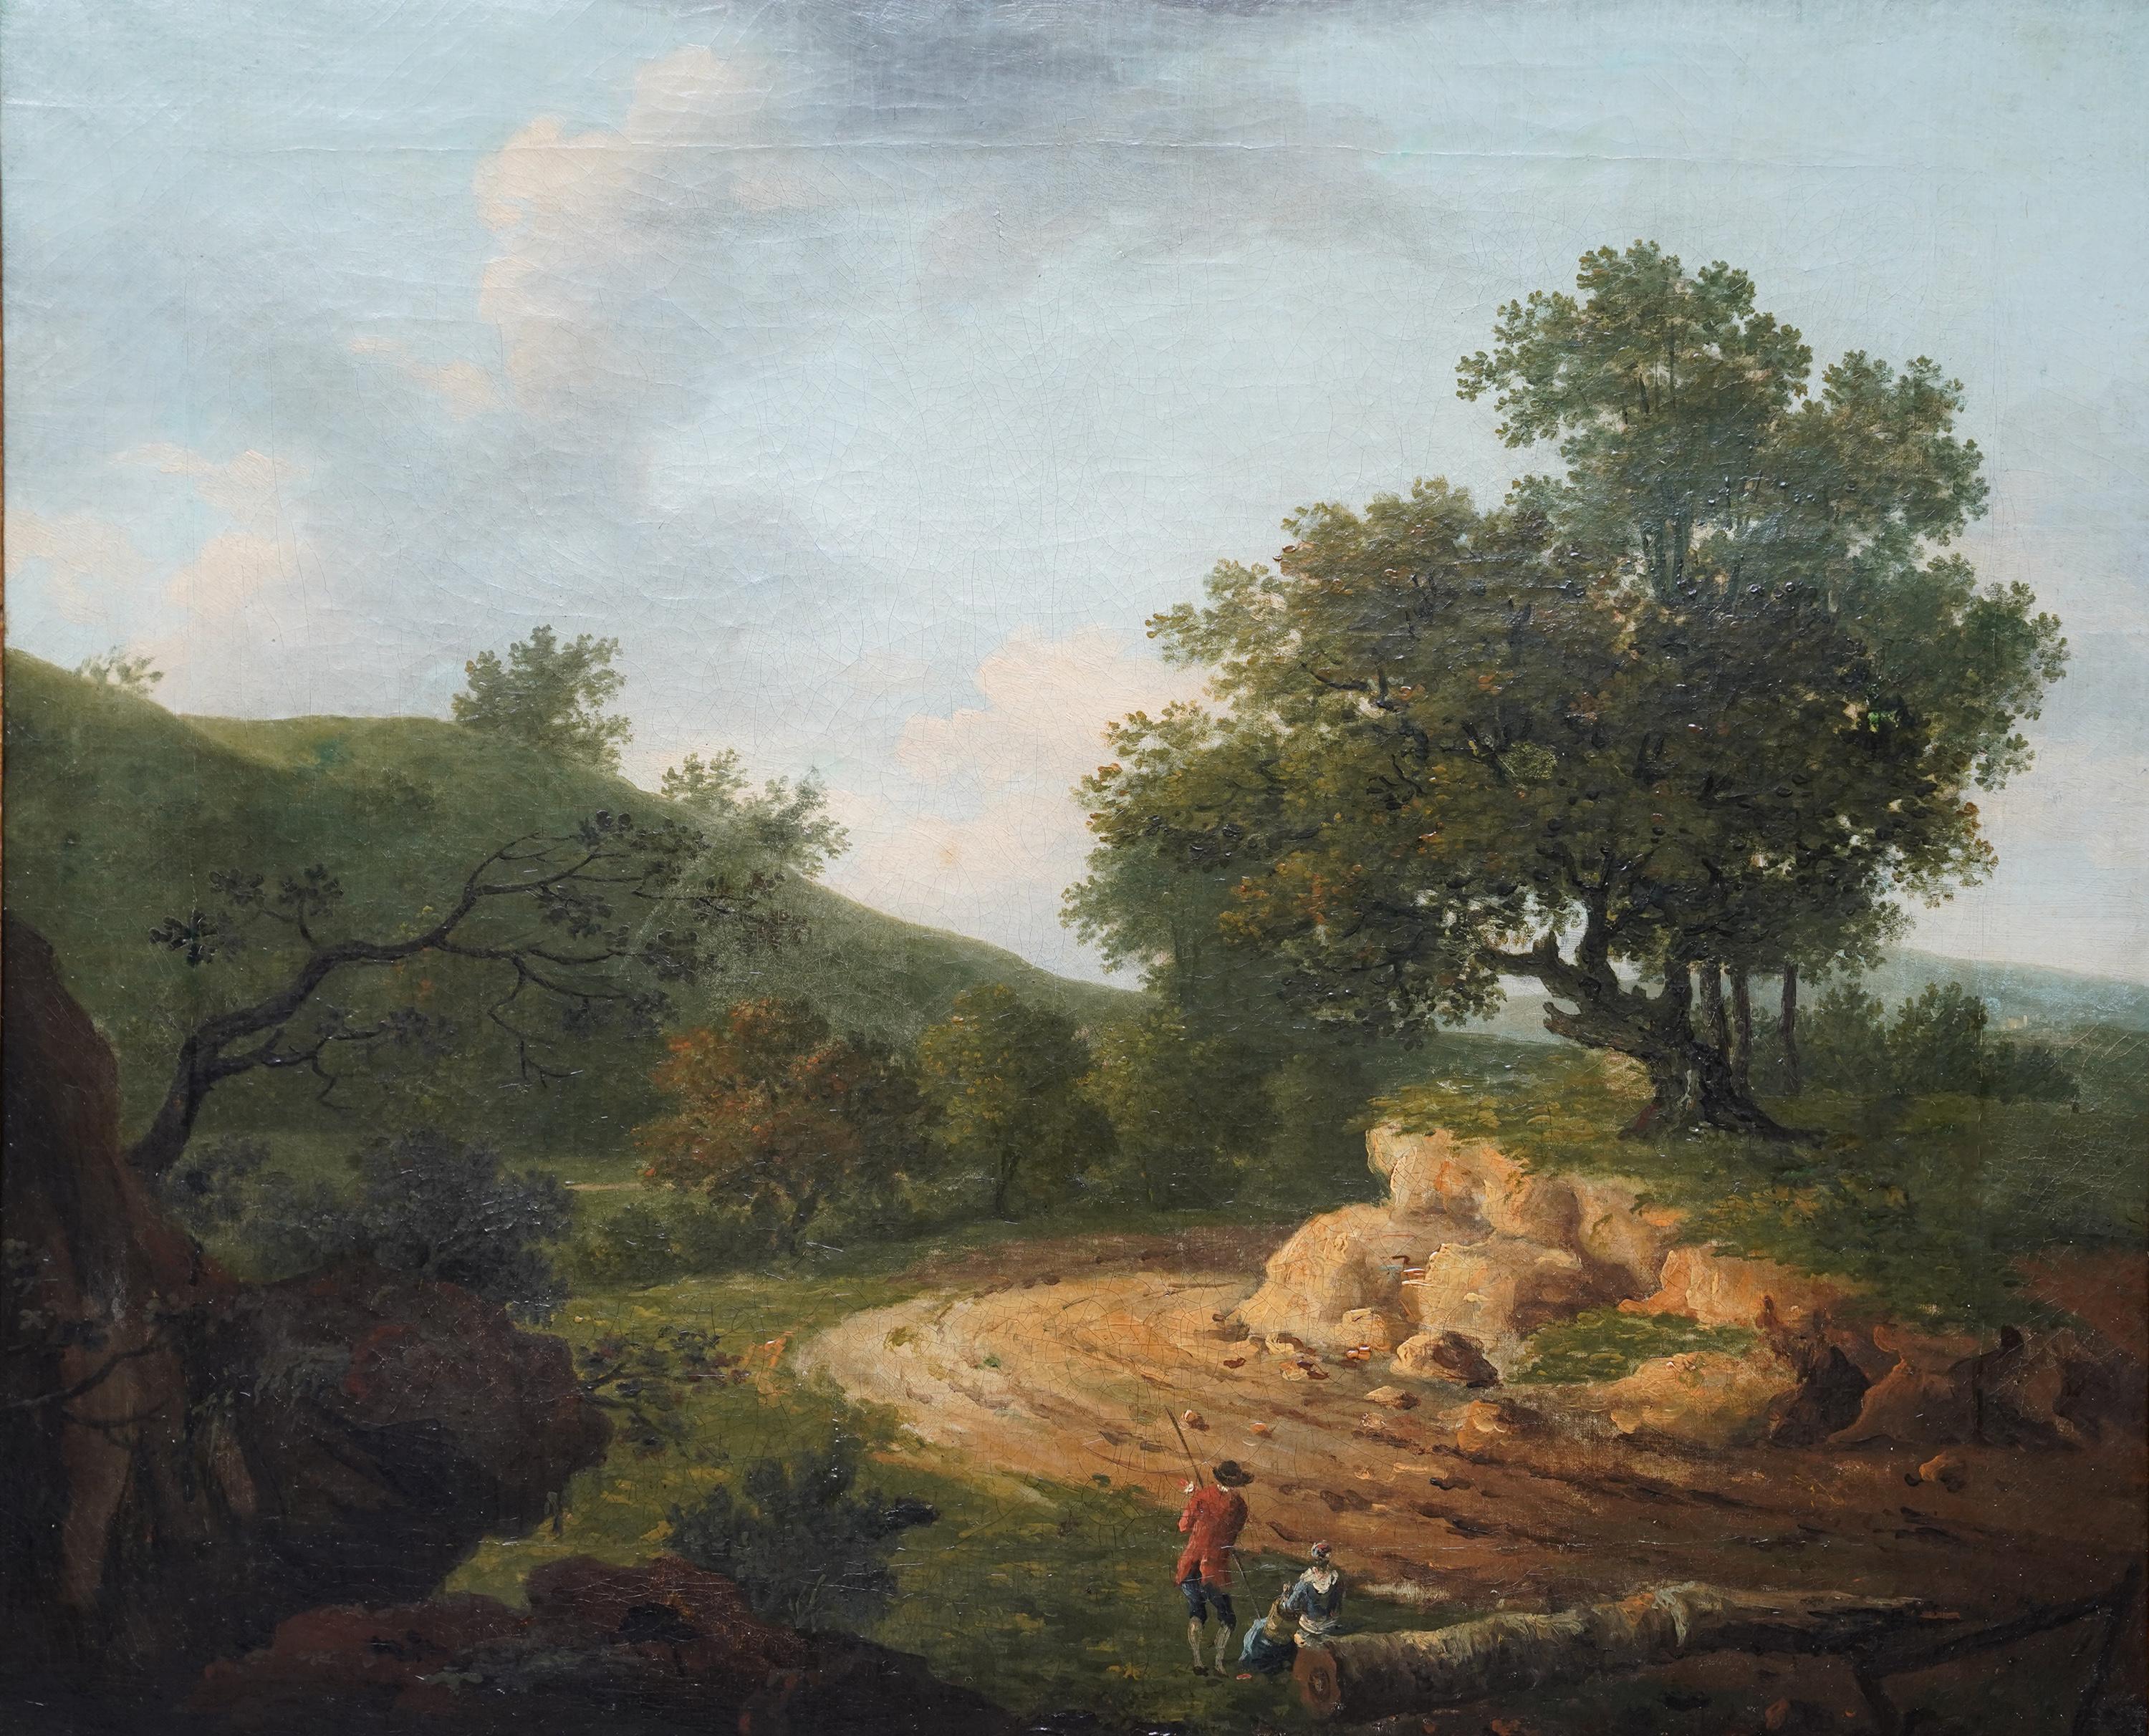 Wooded Landscape with Figures - British 18th century Old Master art oil painting 4